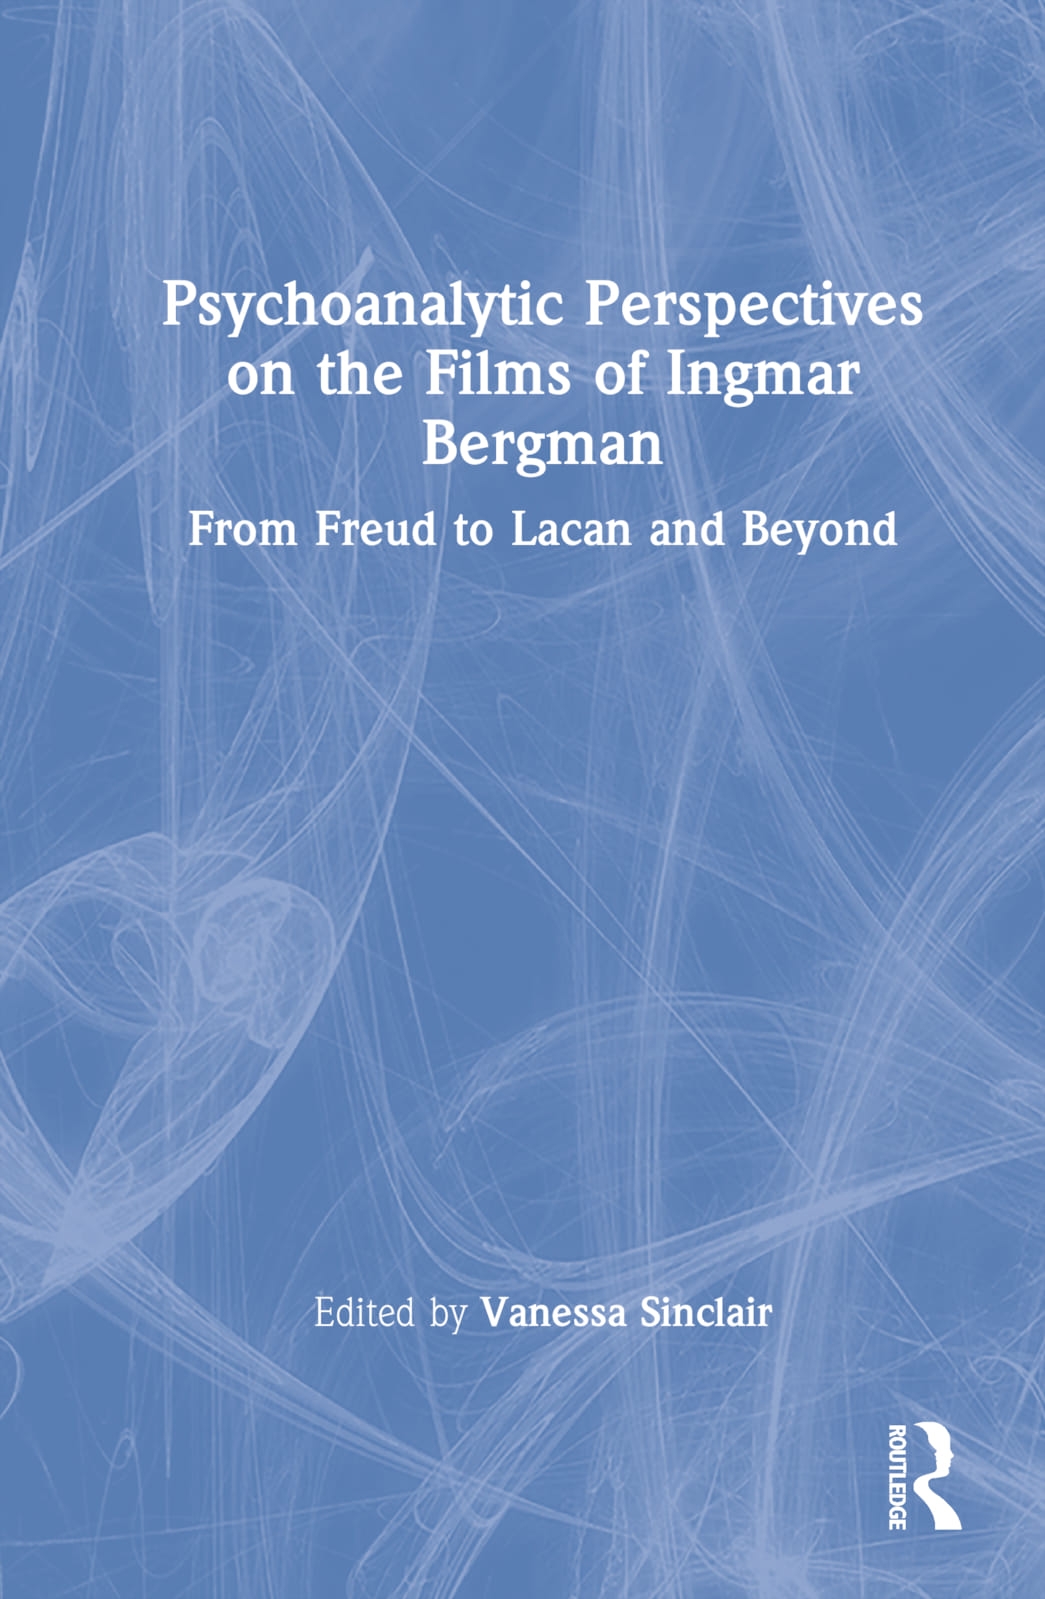 Psychoanalytic Perspectives on the Films of Ingmar Bergman: A Freudian-Lacanian Lens